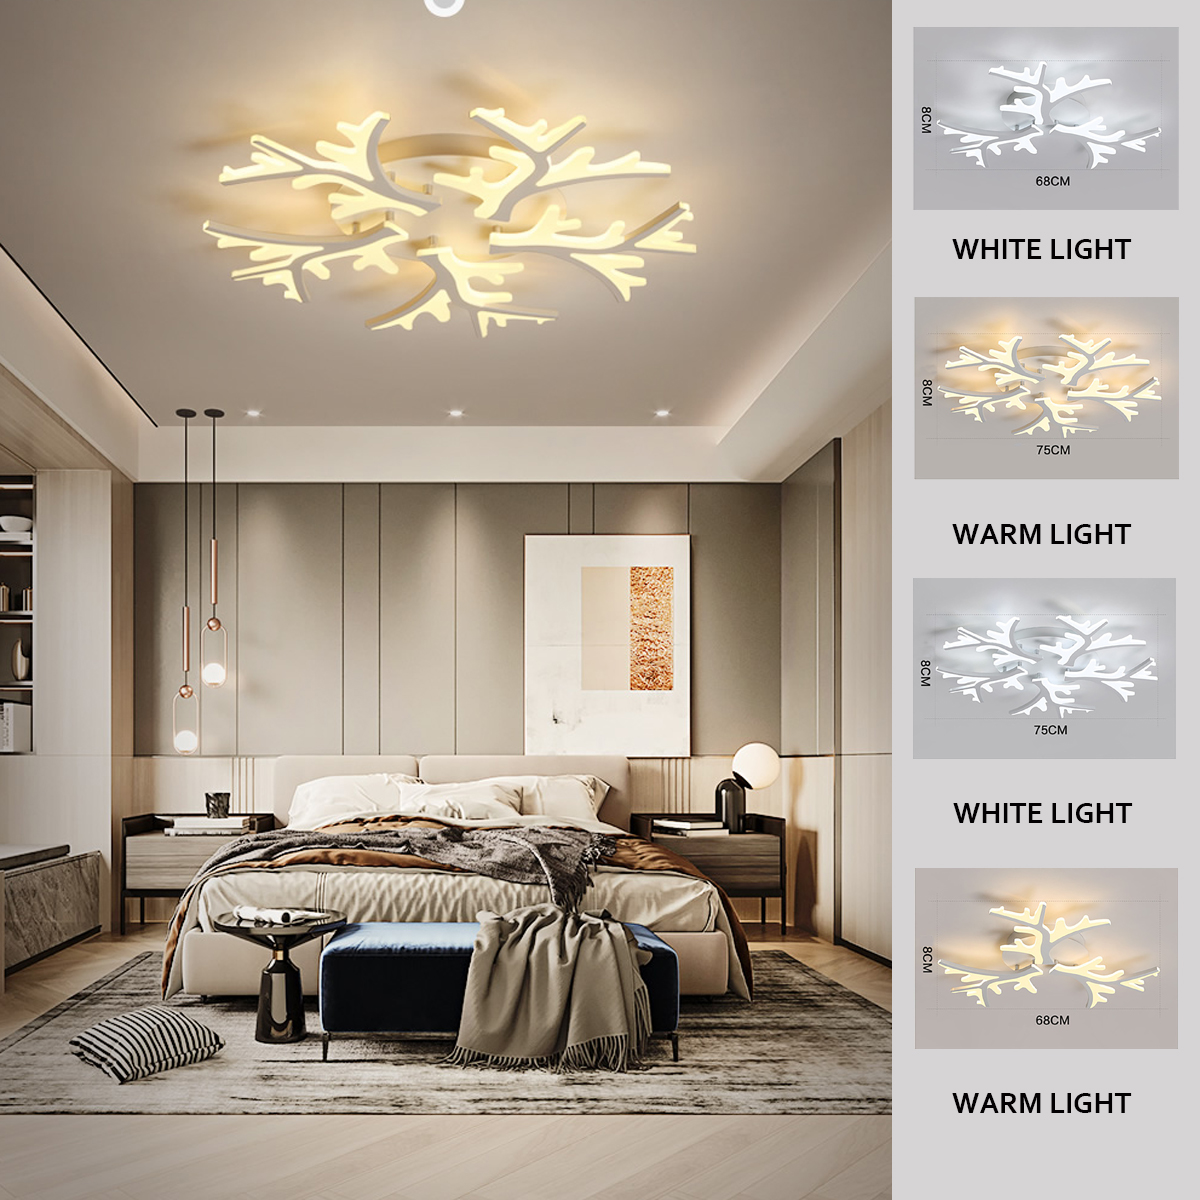 LED-Ceiling-Light-Pendant-Lamp-Hallway-Bedroom-Dimmable-Remote-Fixture-Decor-1795825-1